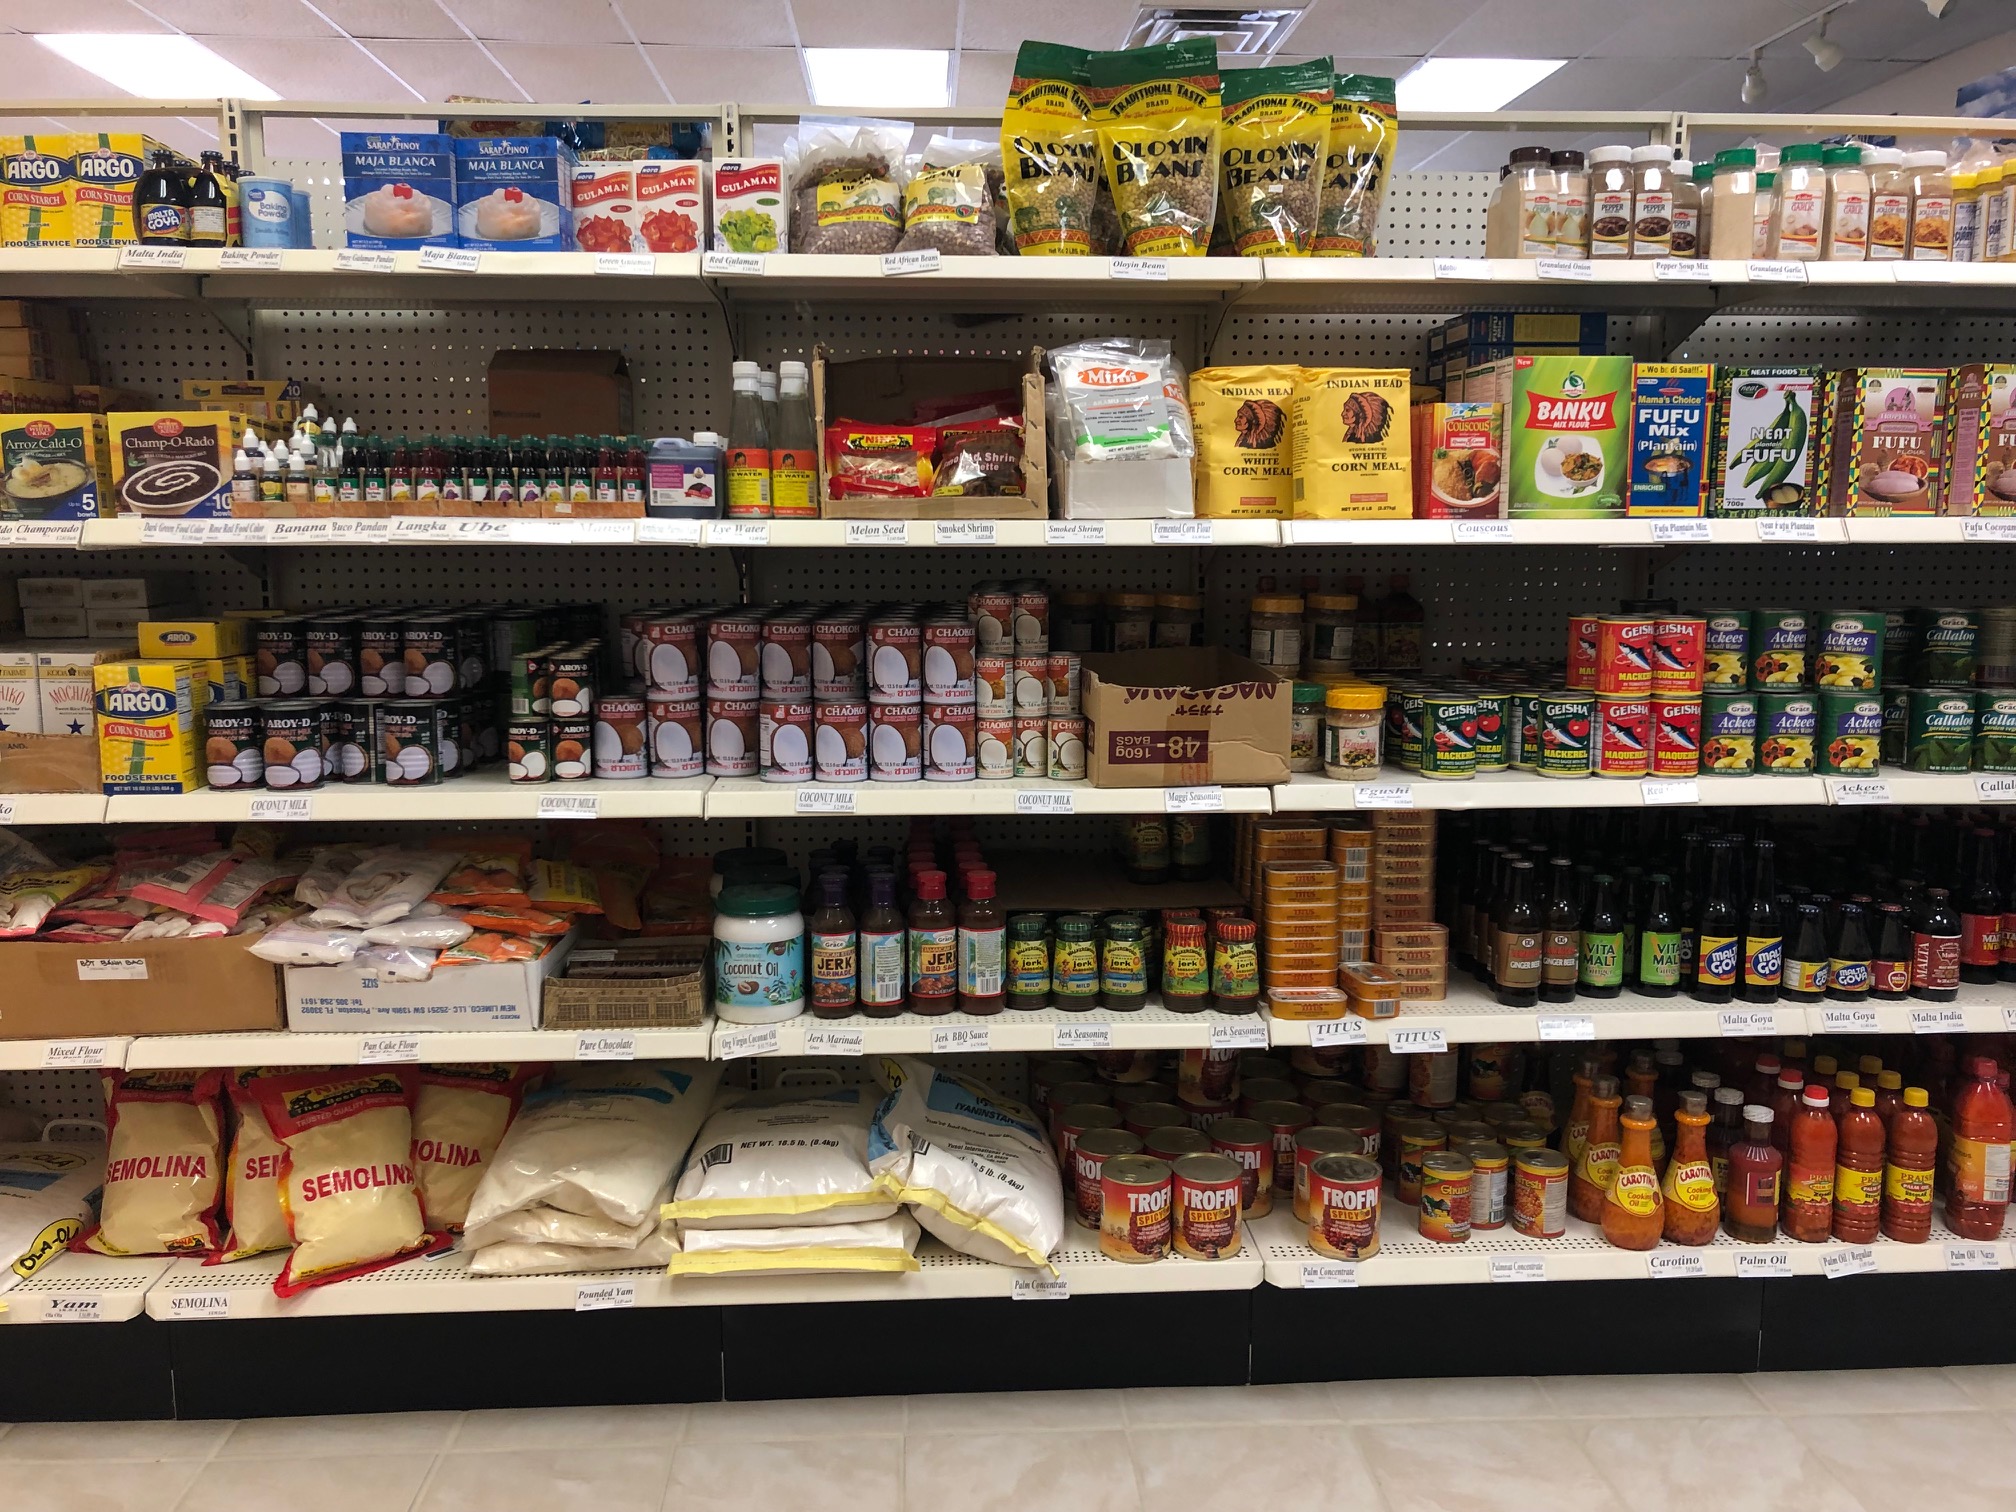 A wide shot shows the entire aisle at the back of the store which has jars, cans, and bags of Filipino foods. Photo by Alyssa Buckley.